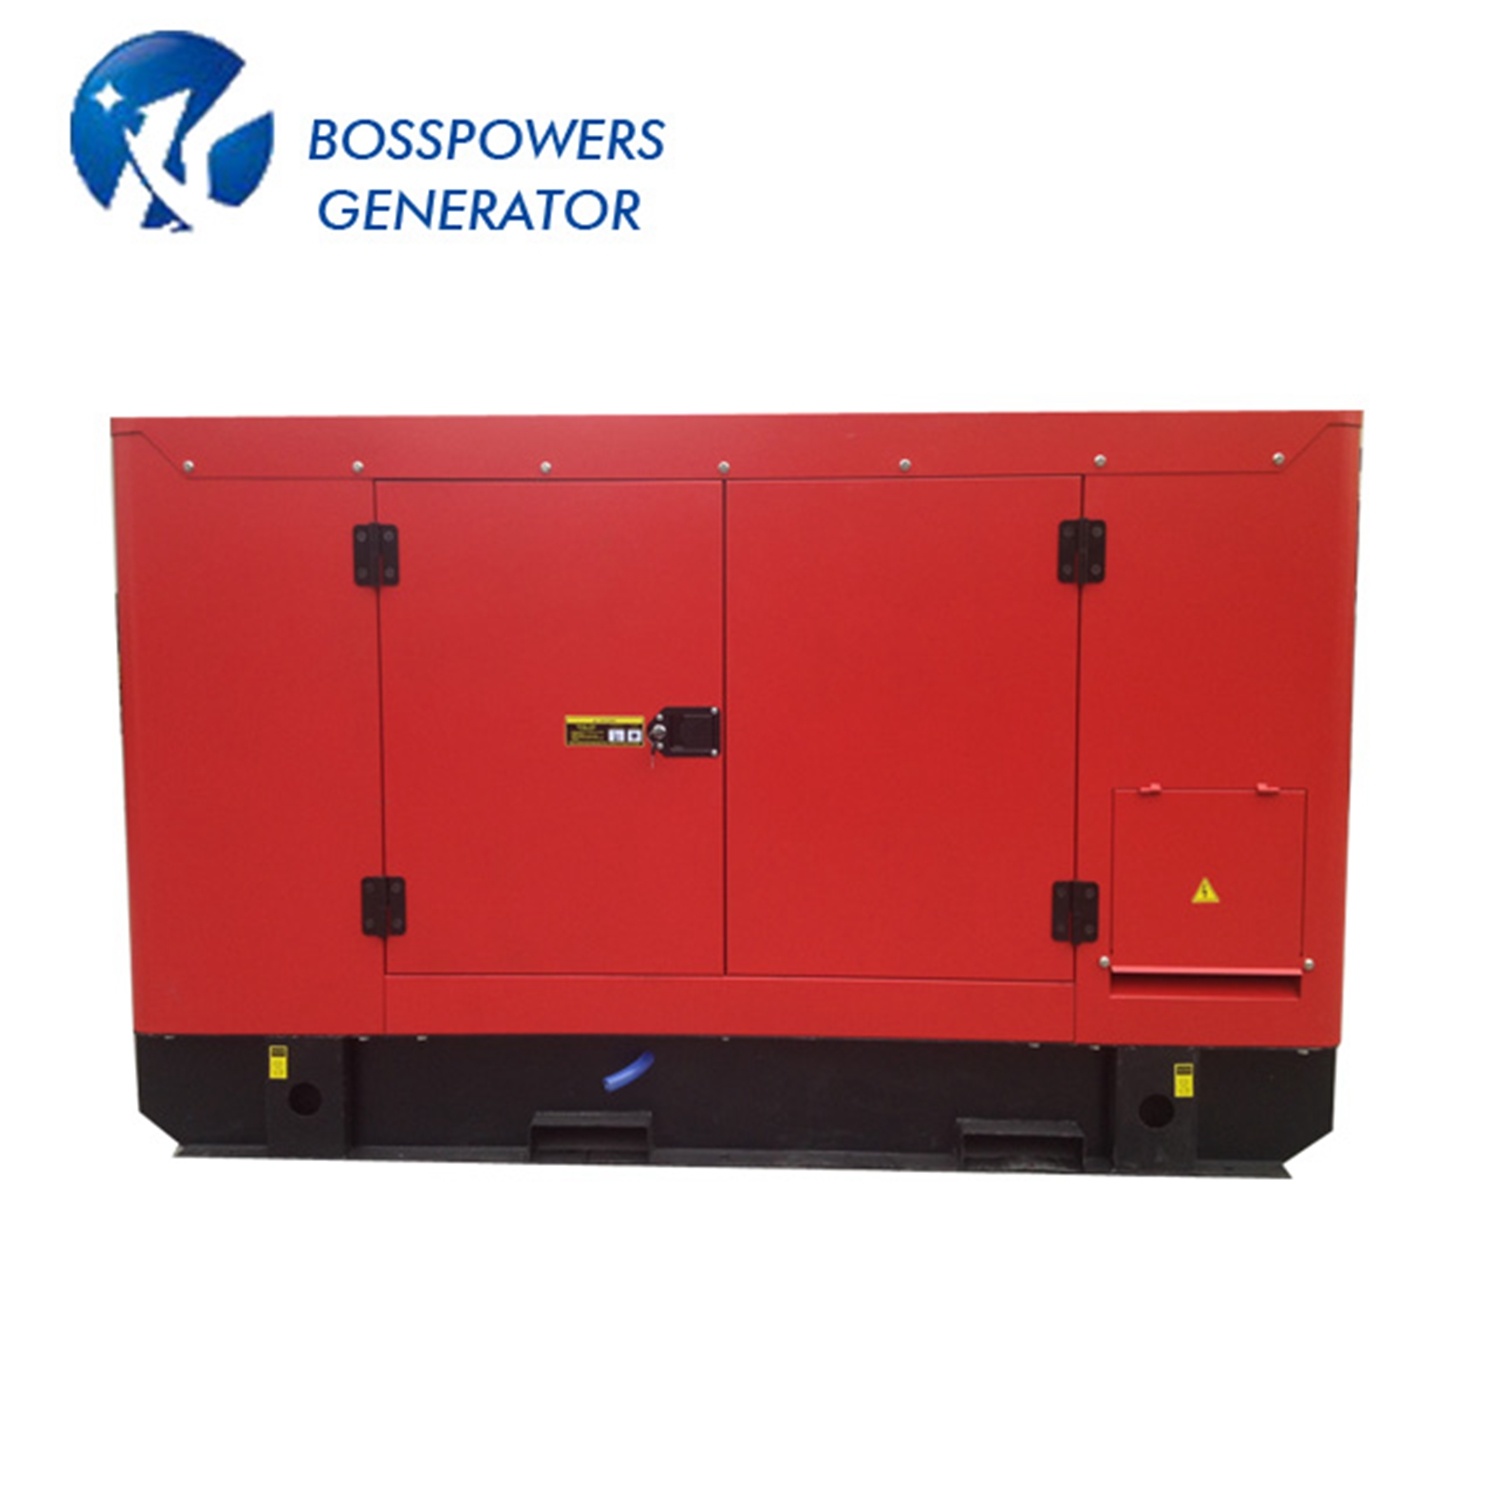 Single Phase Ricardo Weifang Silent Diesel Generator with Special Offers